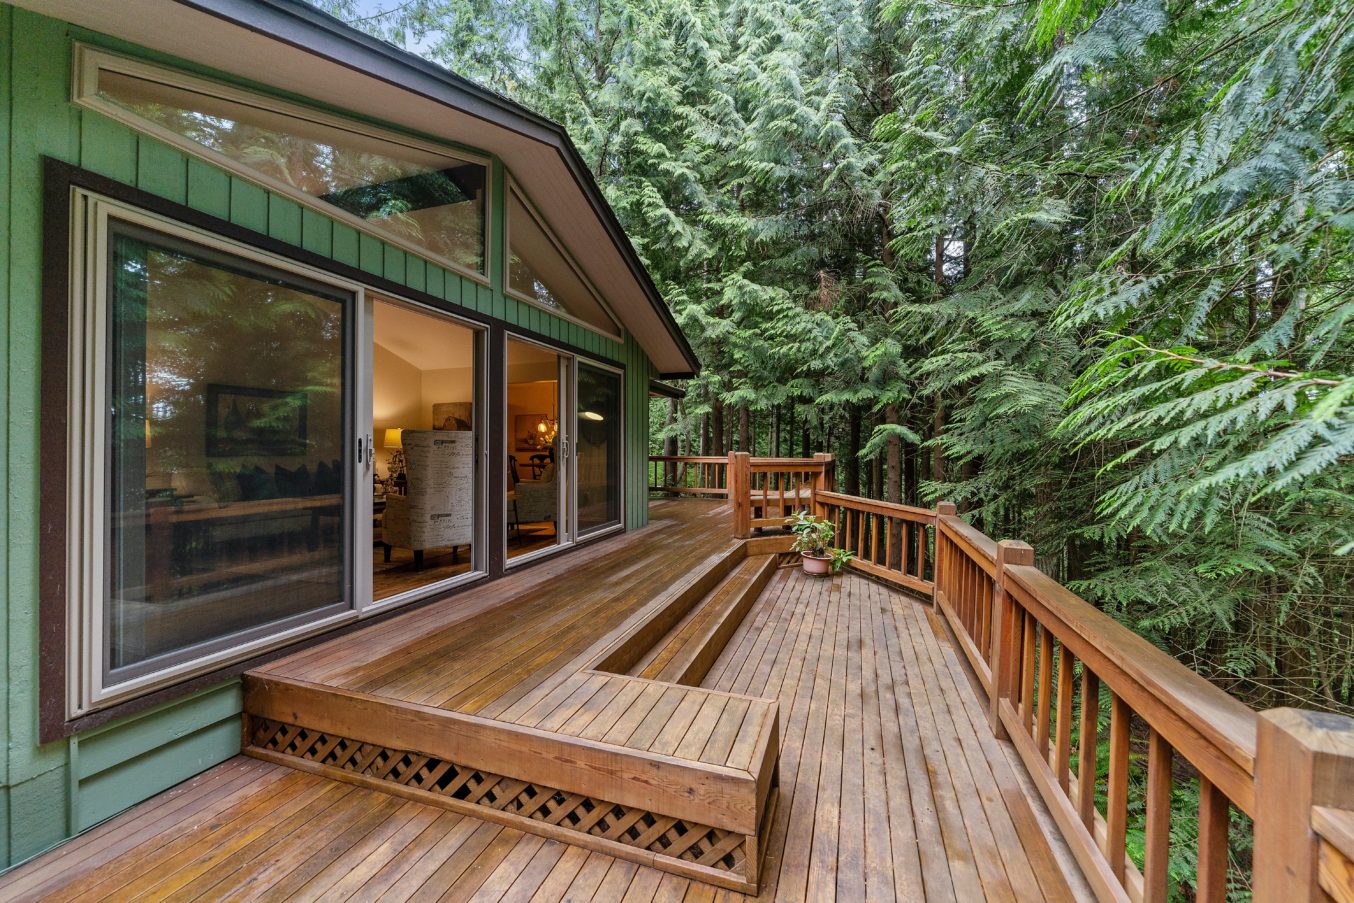 Don’t DIY Your Deck – Hire a Qualified Orinda Deck Builder Instead